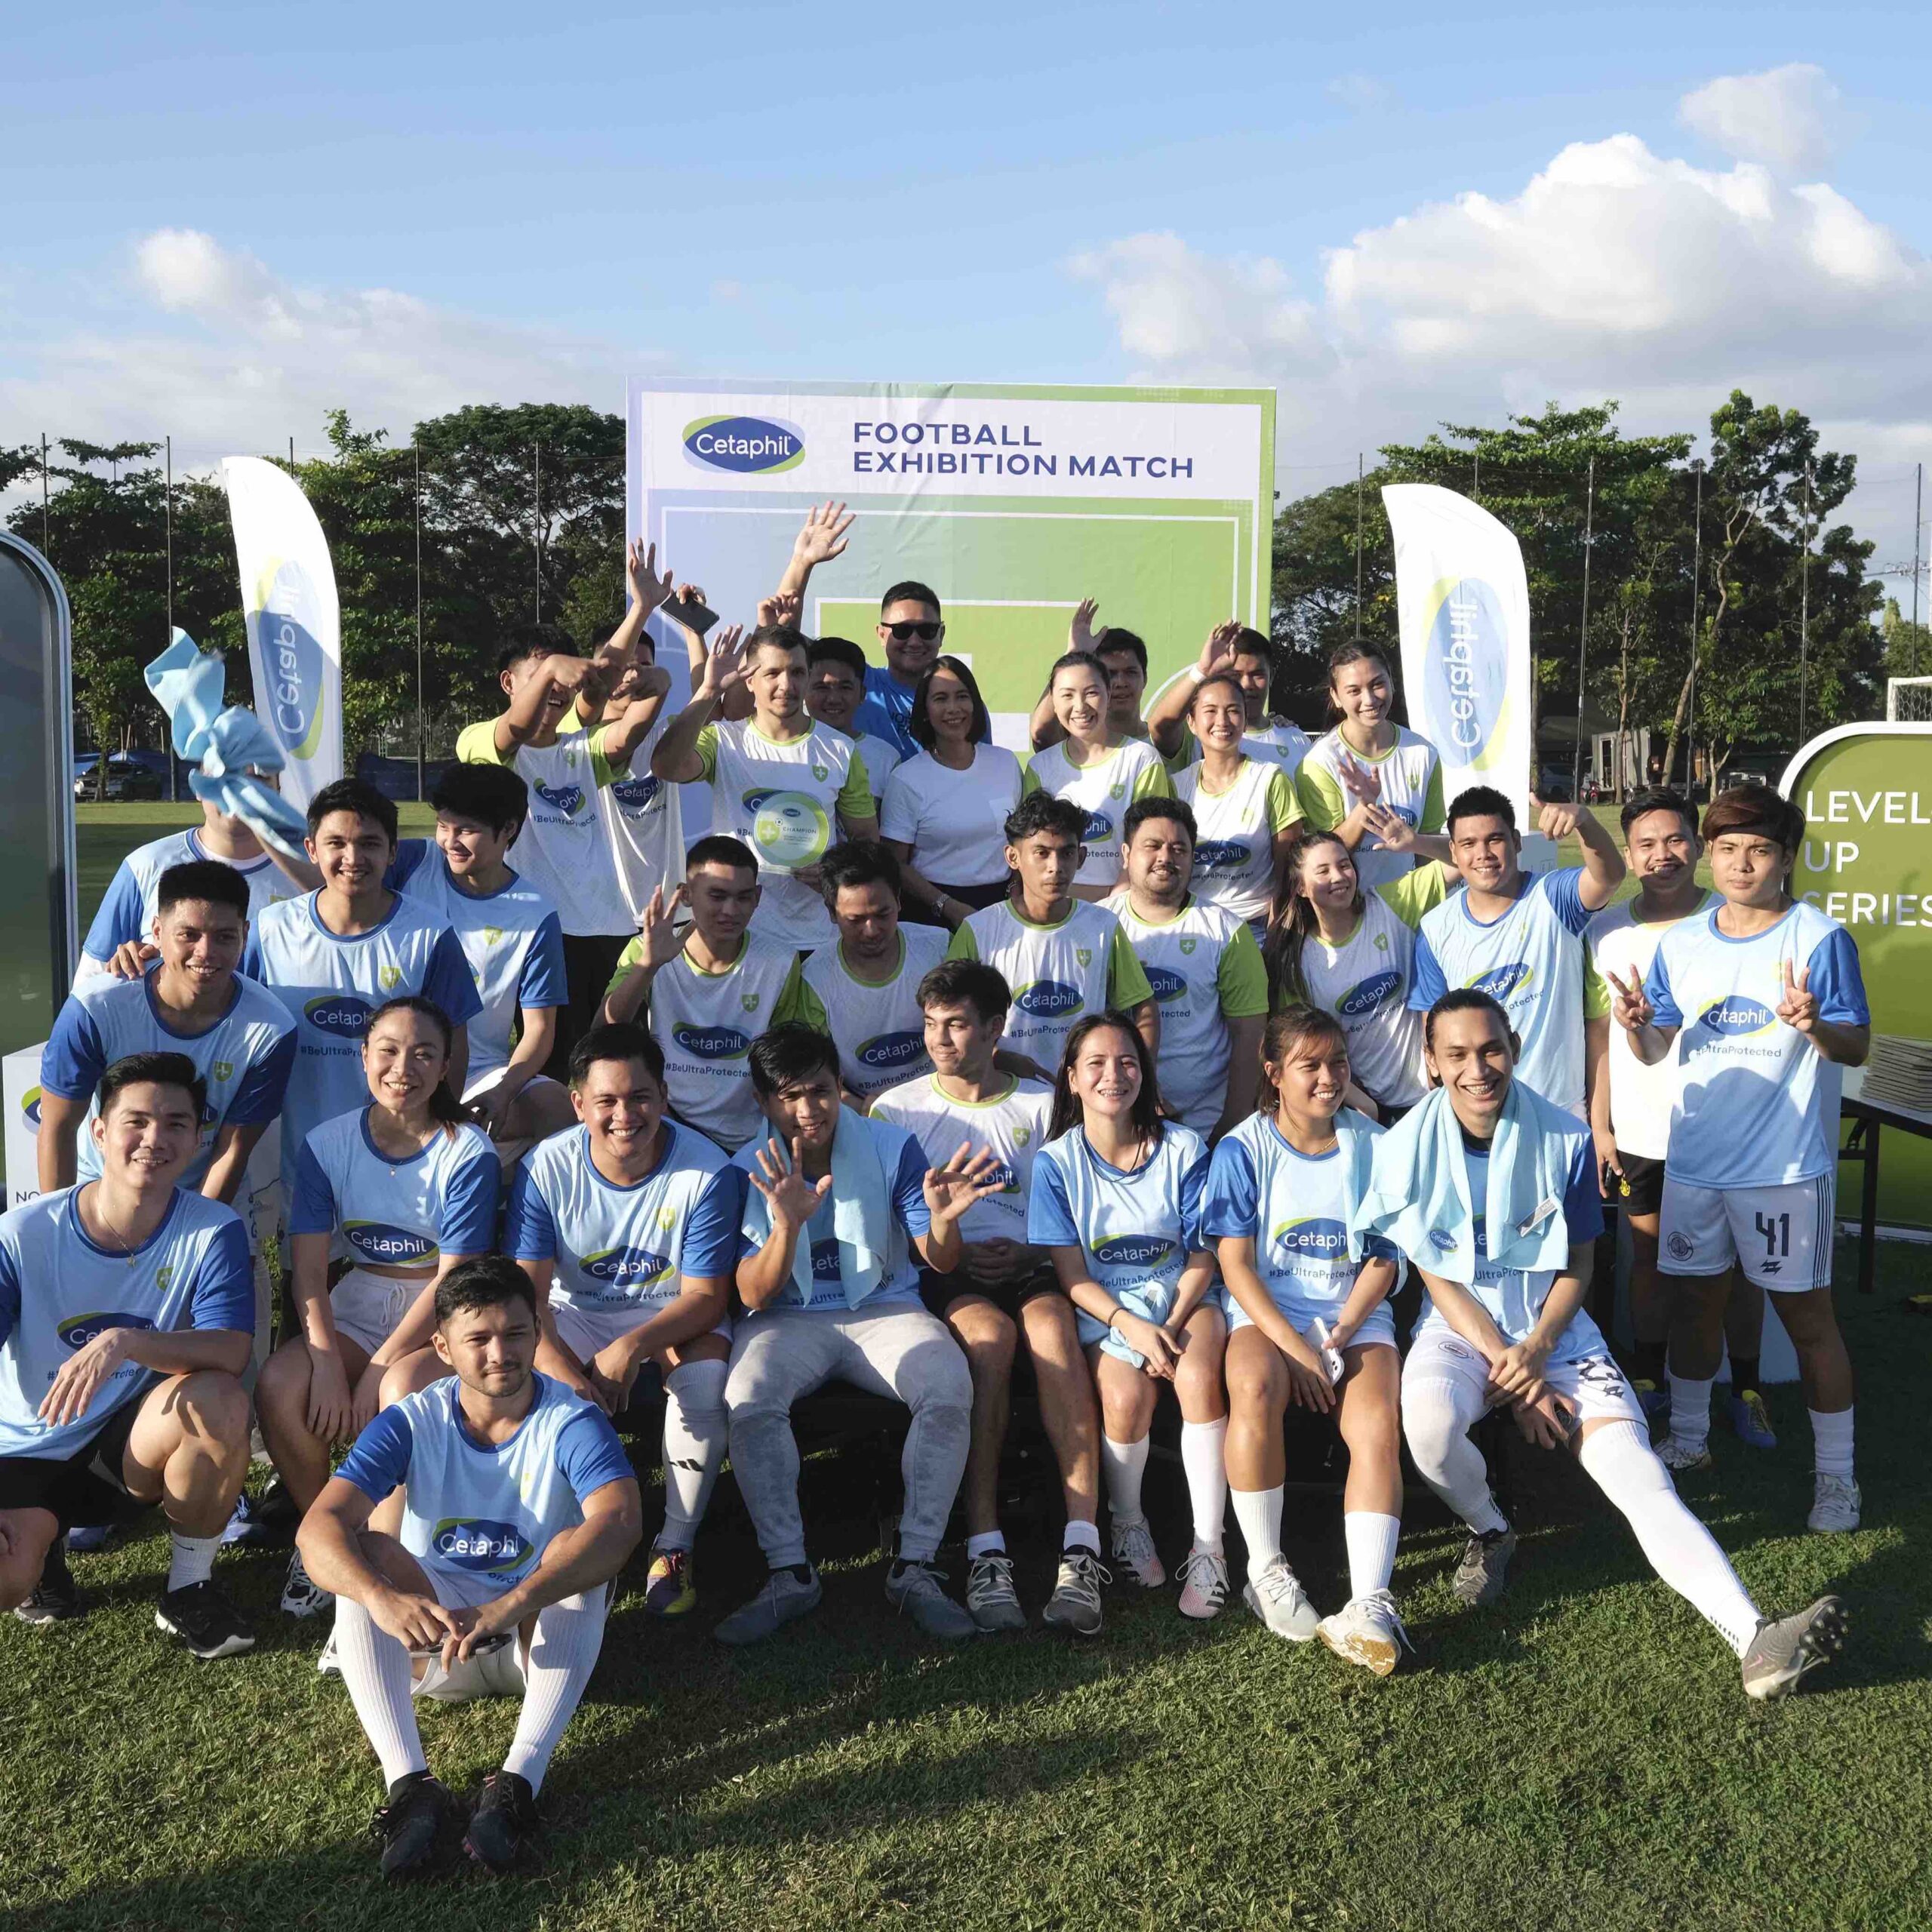 Cetaphil Level Up Series: Football Exhibition Match 